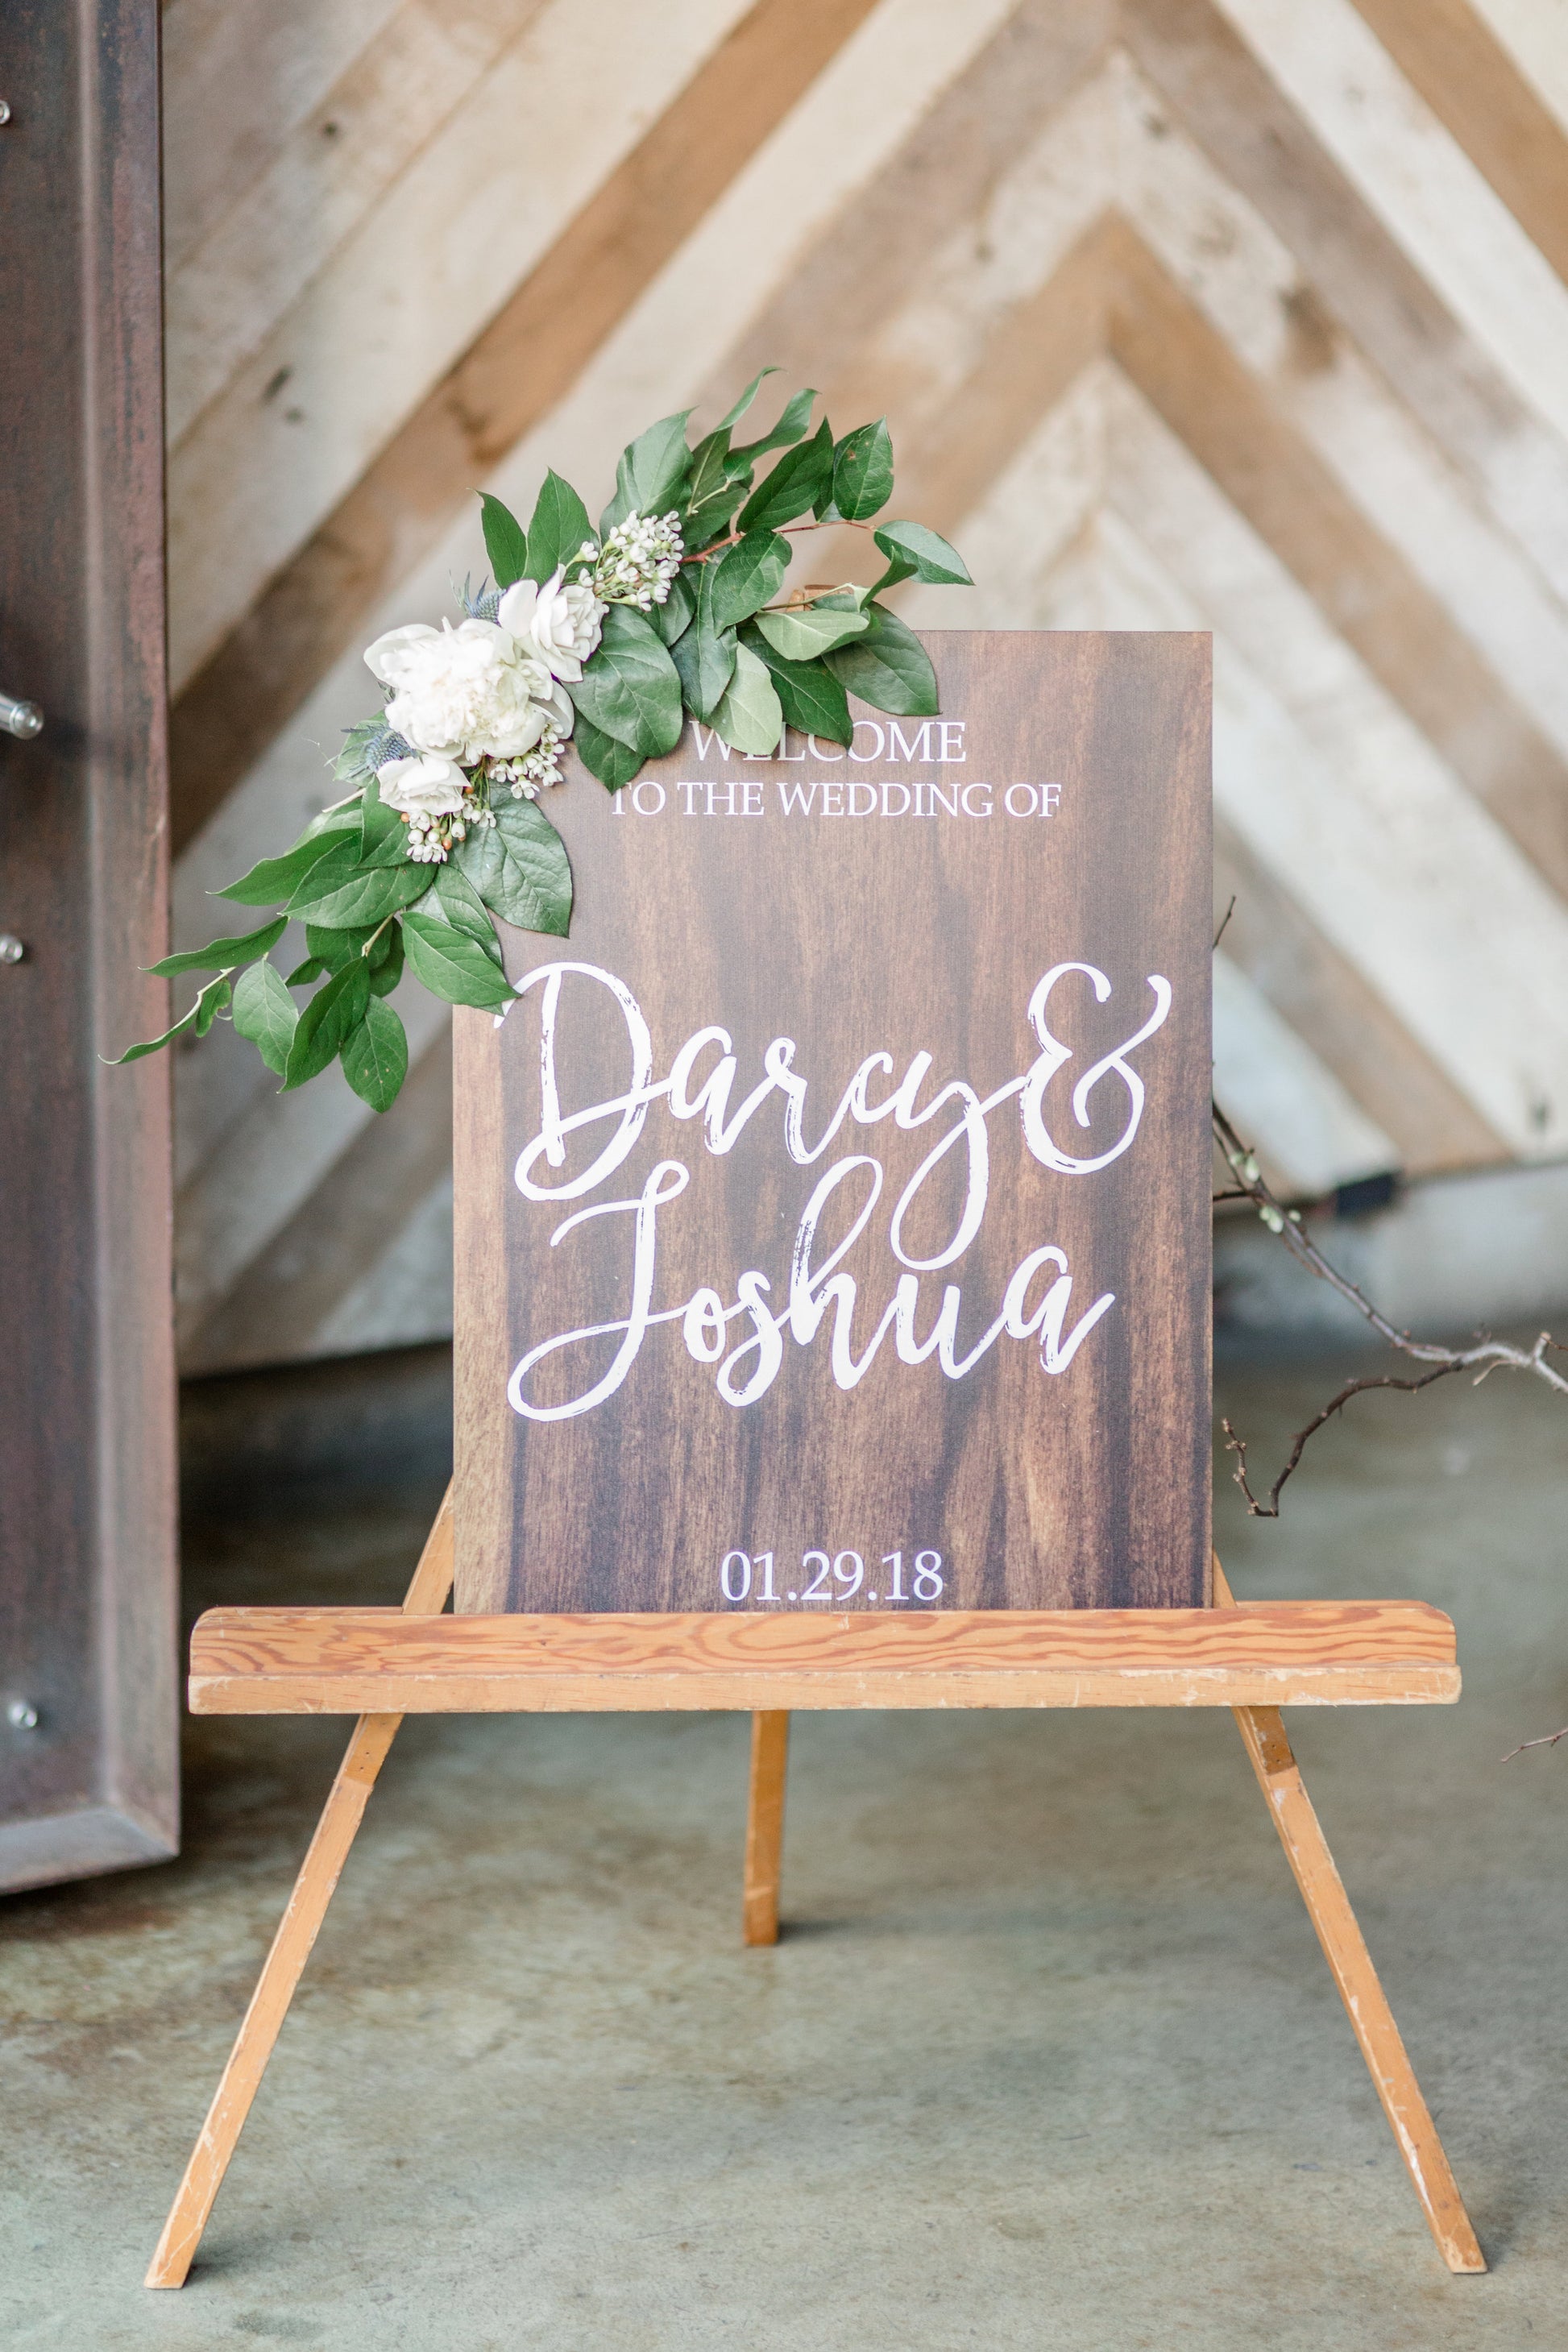 Wedding Welcome Sign, Personalized Poster Board, Welcome Message Board,  Custom Wedding Sign, Welcome to Our Wedding, Printed on Foam Board 